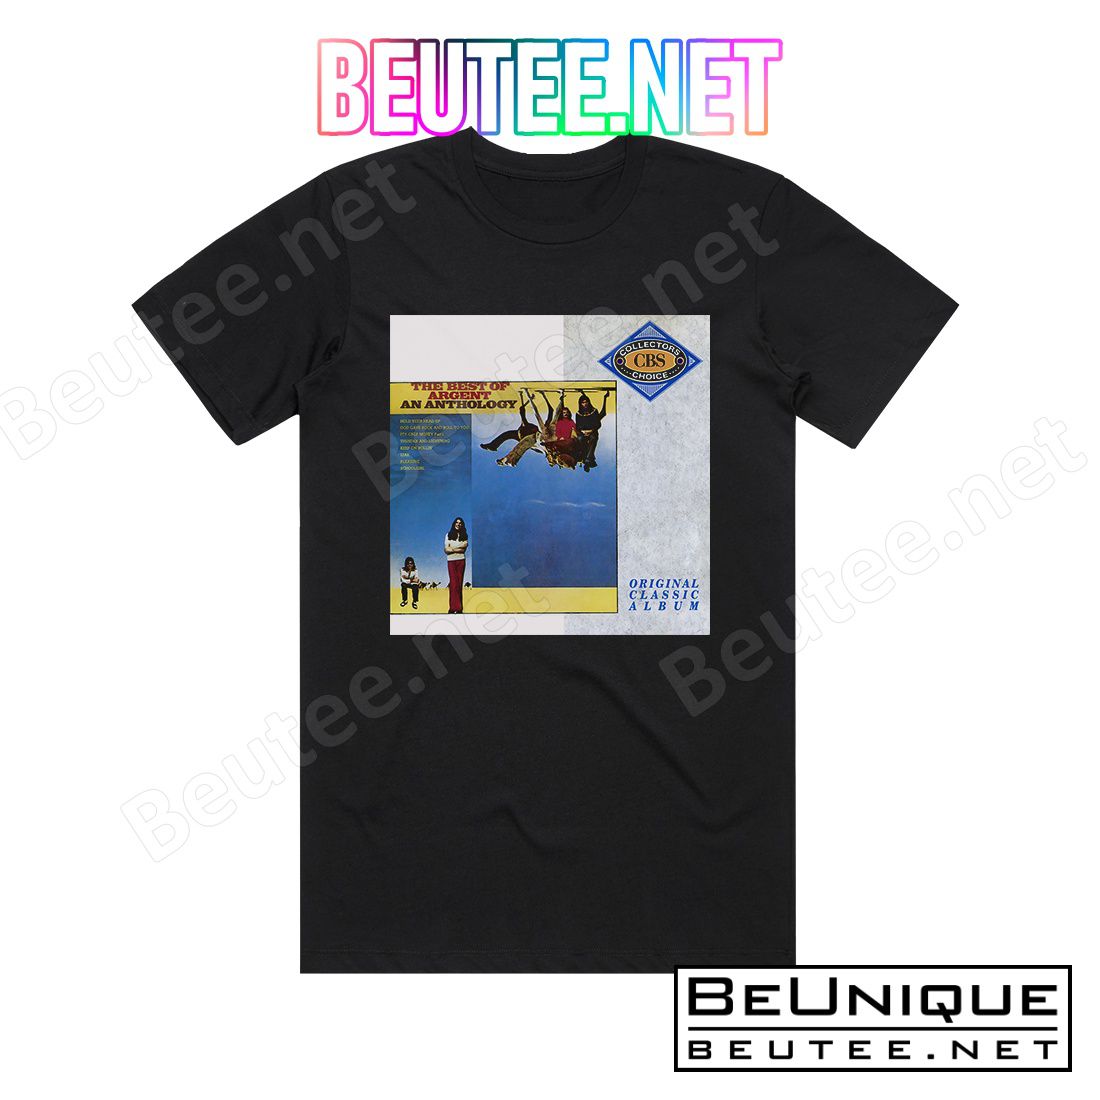 Argent The Best Of Argent  An Anthology Album Cover T-Shirt